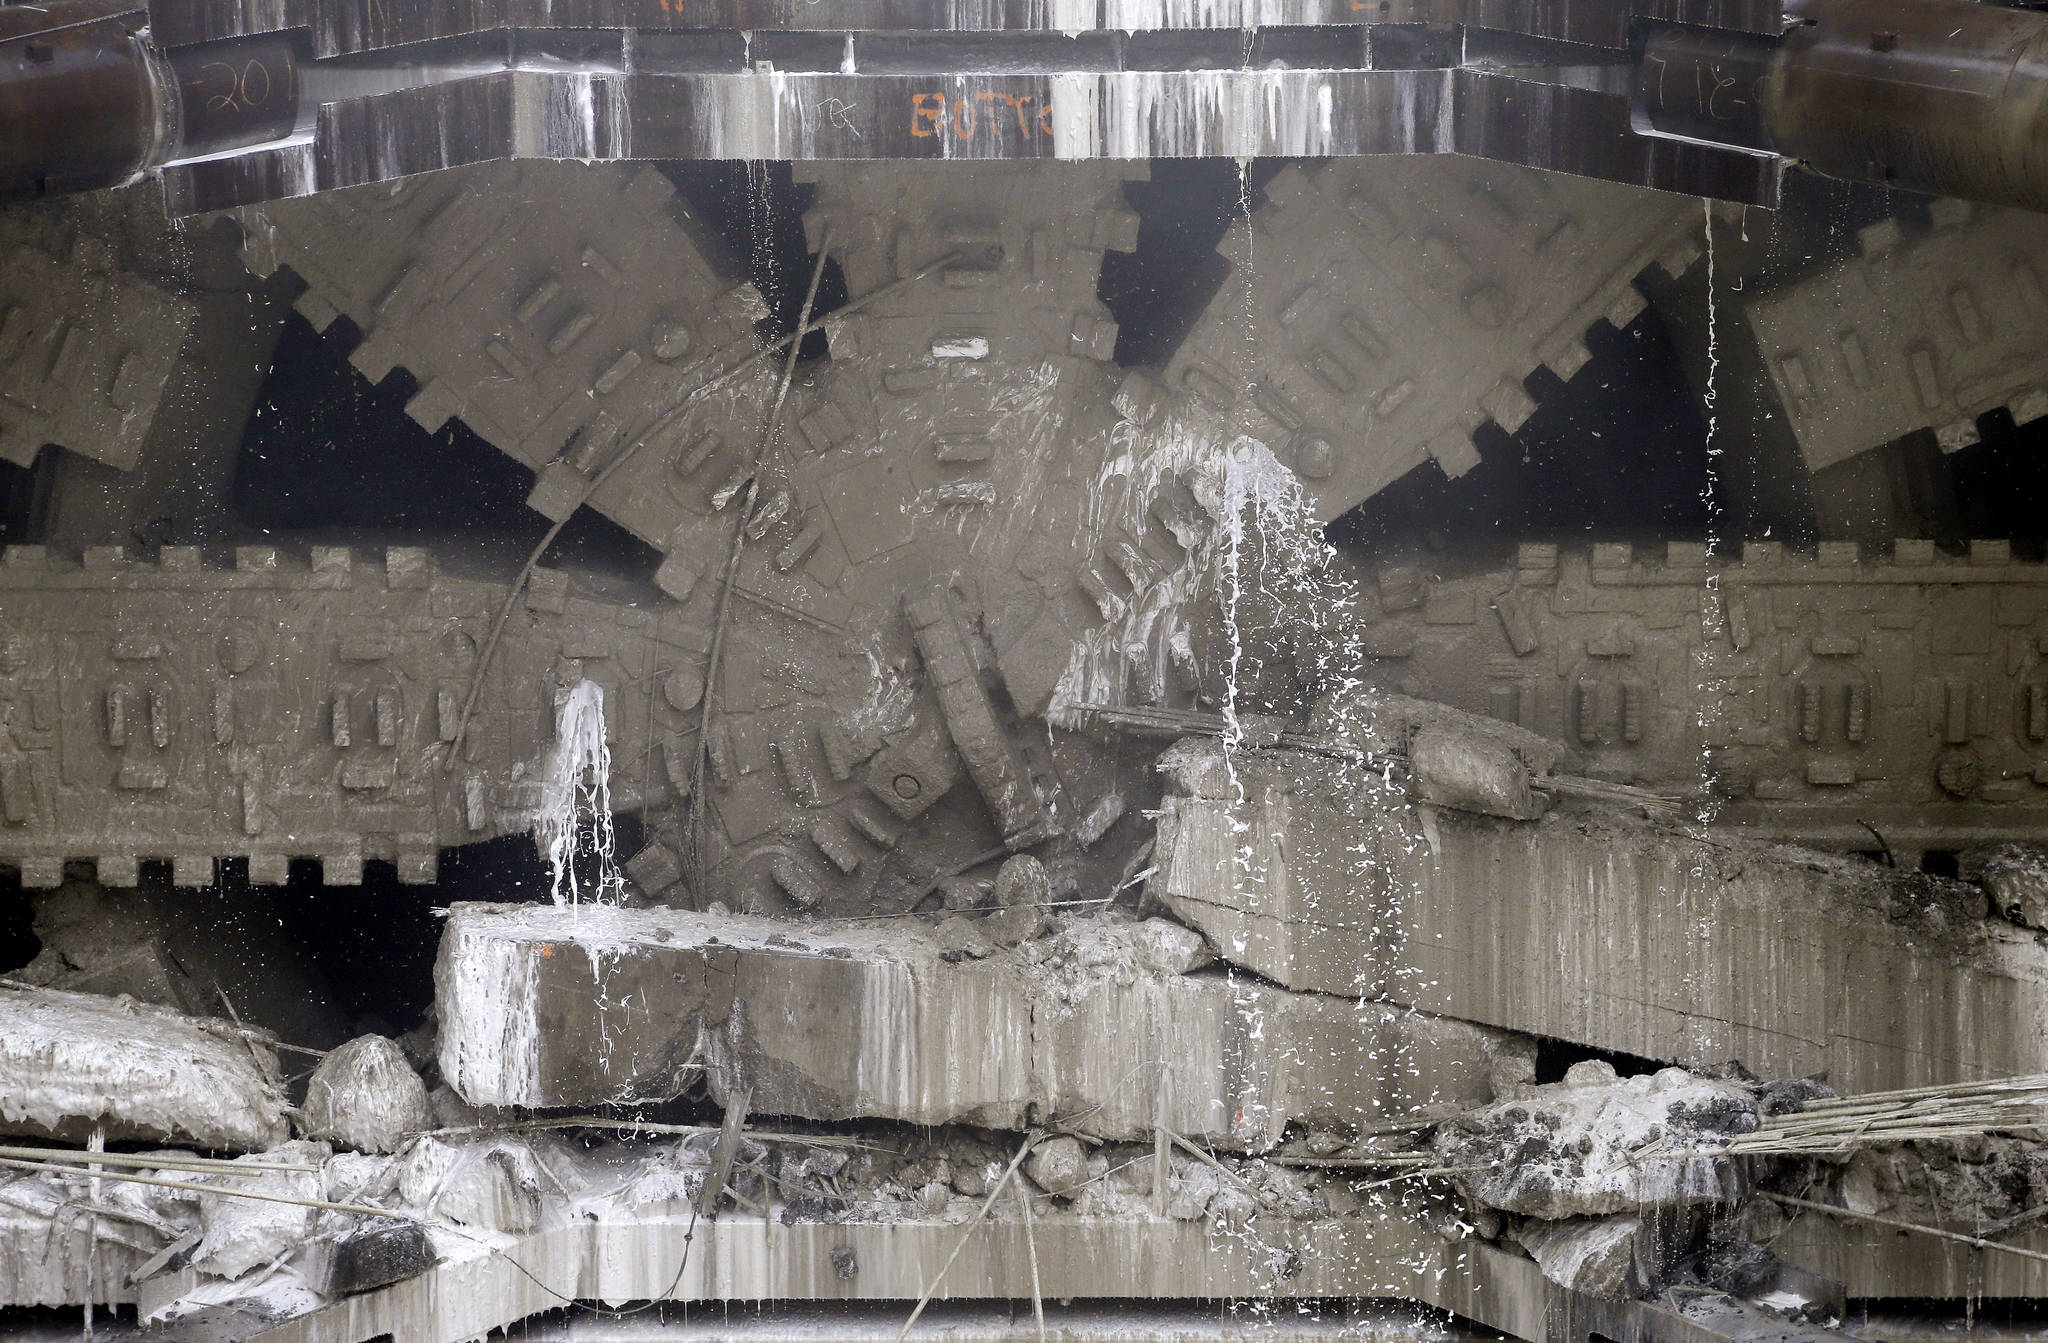 Water cascades from the blades of a massive tunneling machine as it breaks through a 5-foot concrete wall while completing boring for the state Highway 99 route Tuesday under Seattle. (Elaine Thompson/The Associated Press)